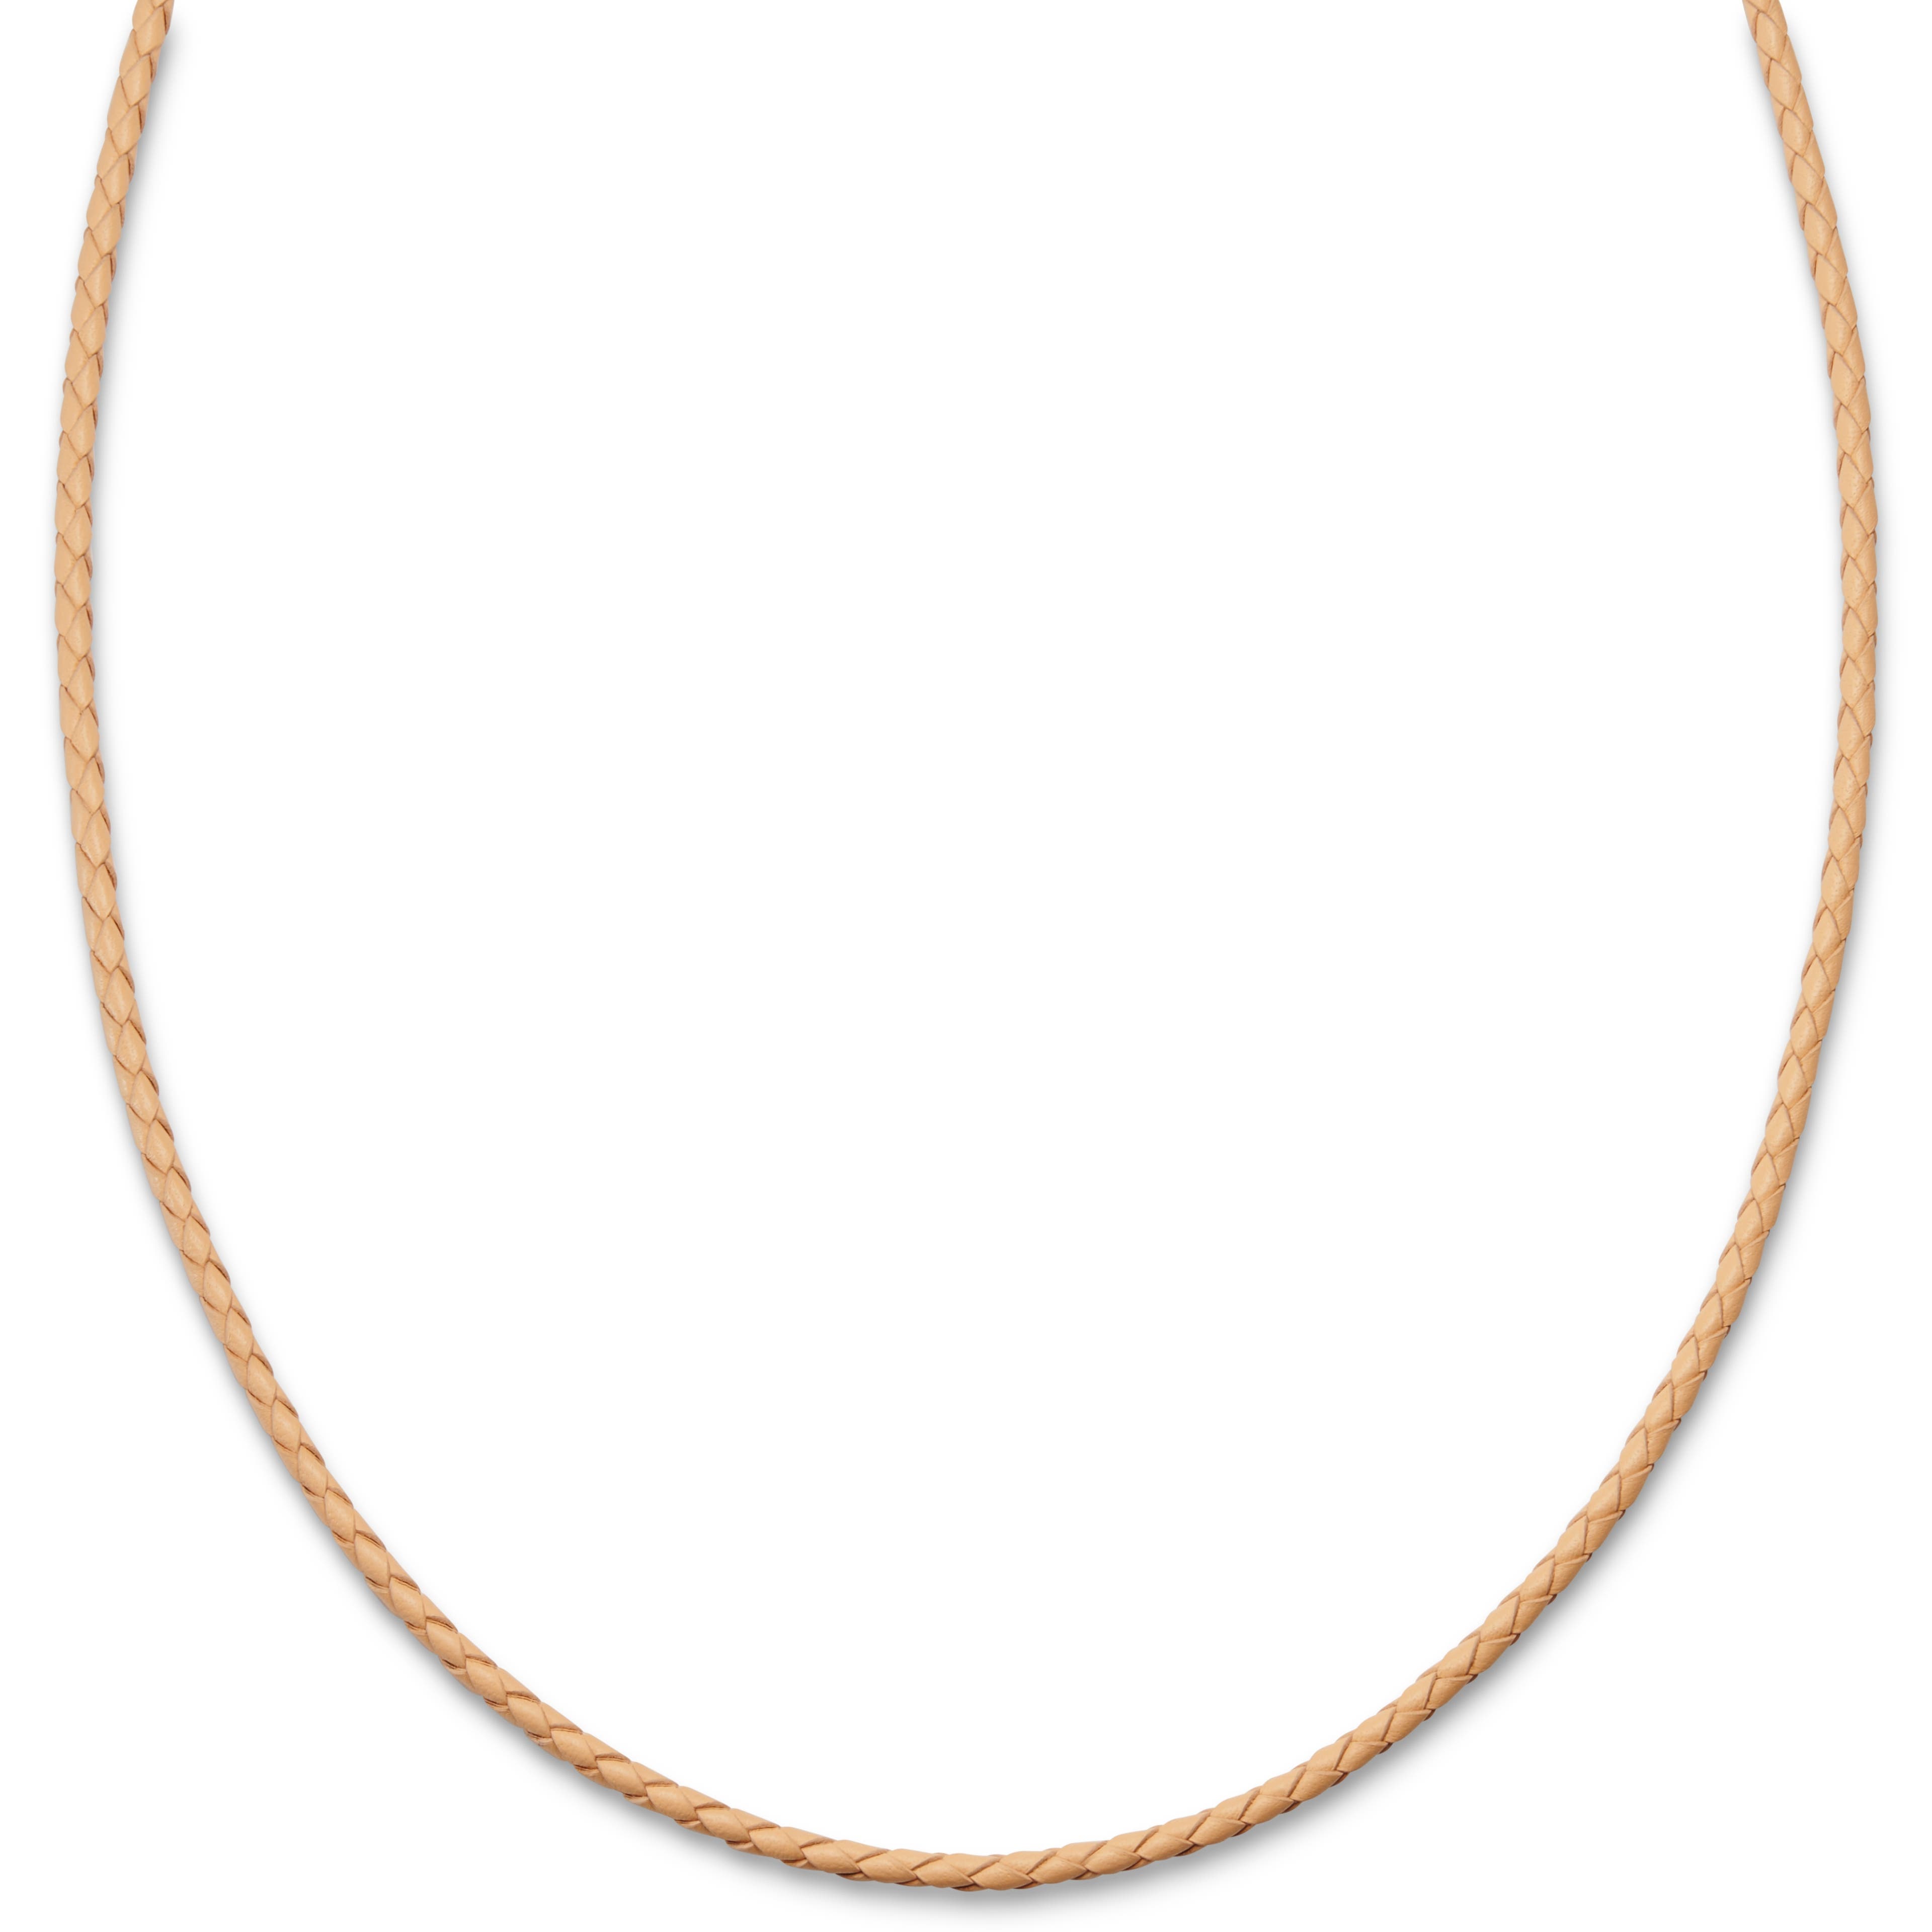 Tenvis | 1/8" (3 mm) Sand Leather Necklace